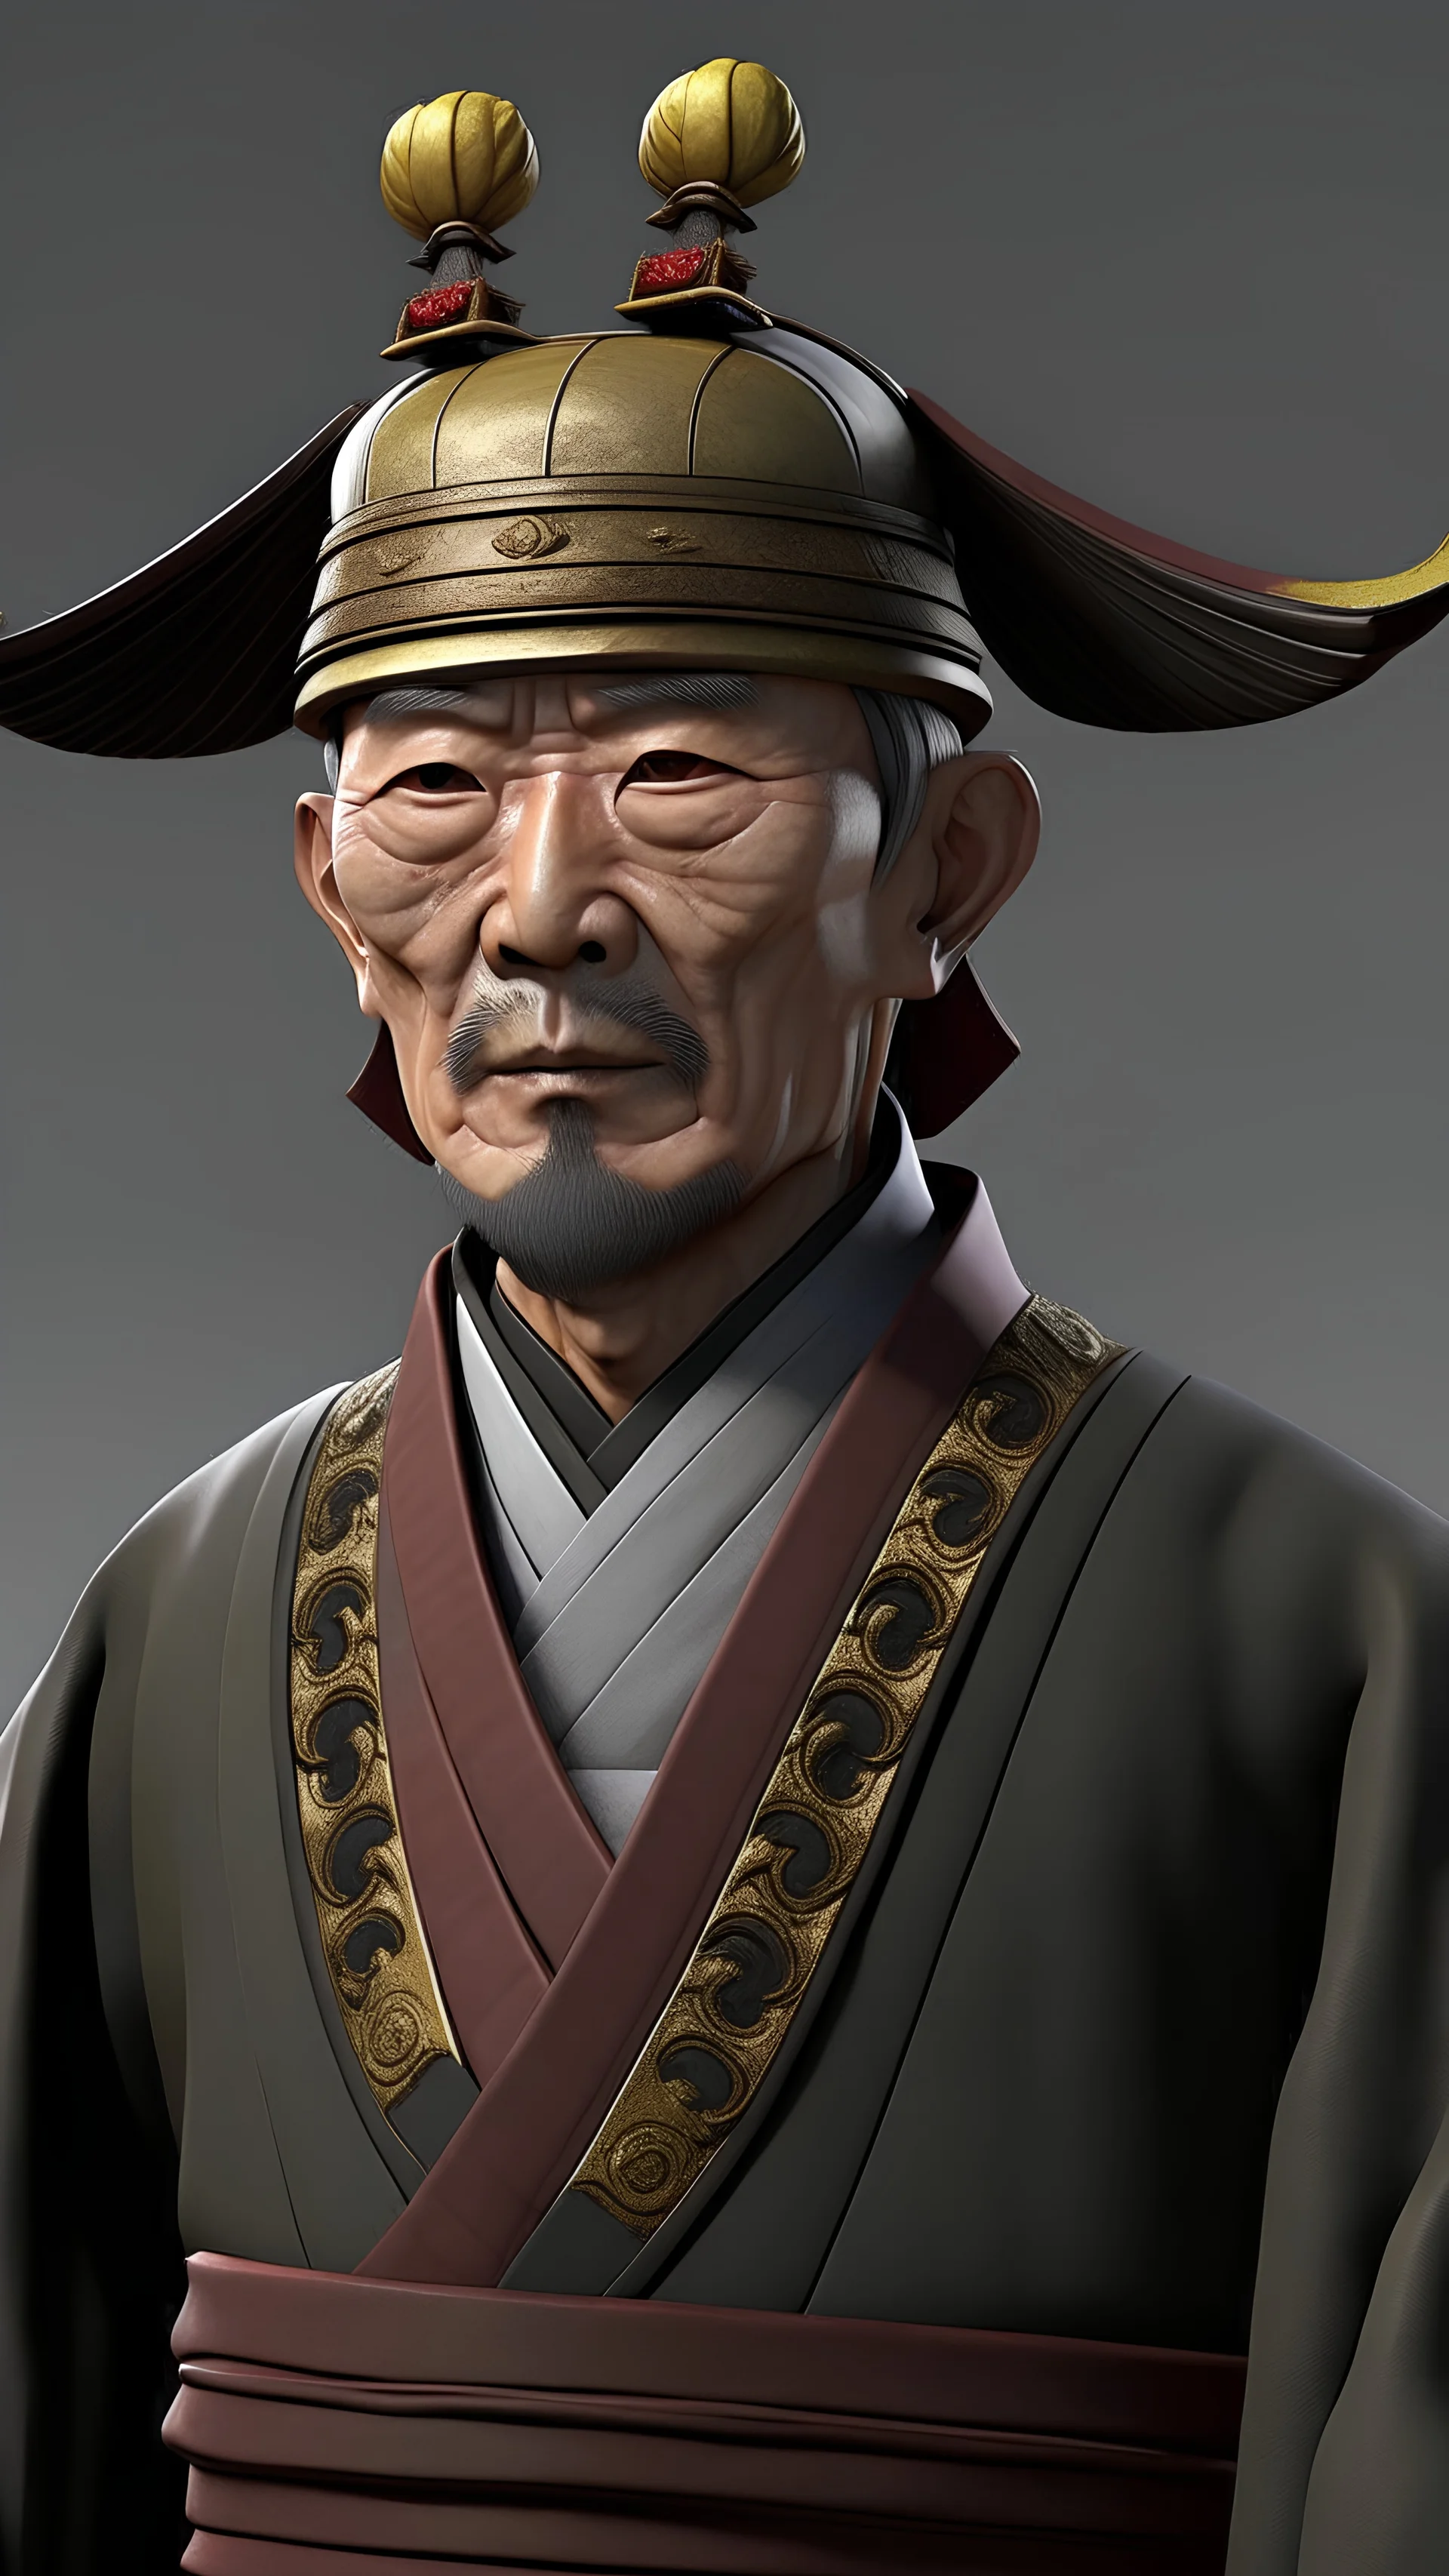 Korea, Goryeo Dynasty, General, Kang Gam-chan, Strictly, Goryeo Commander-in-Chief, Goryeo General, High Quality, Realistic, Old Man, Goryeo War, 3d,